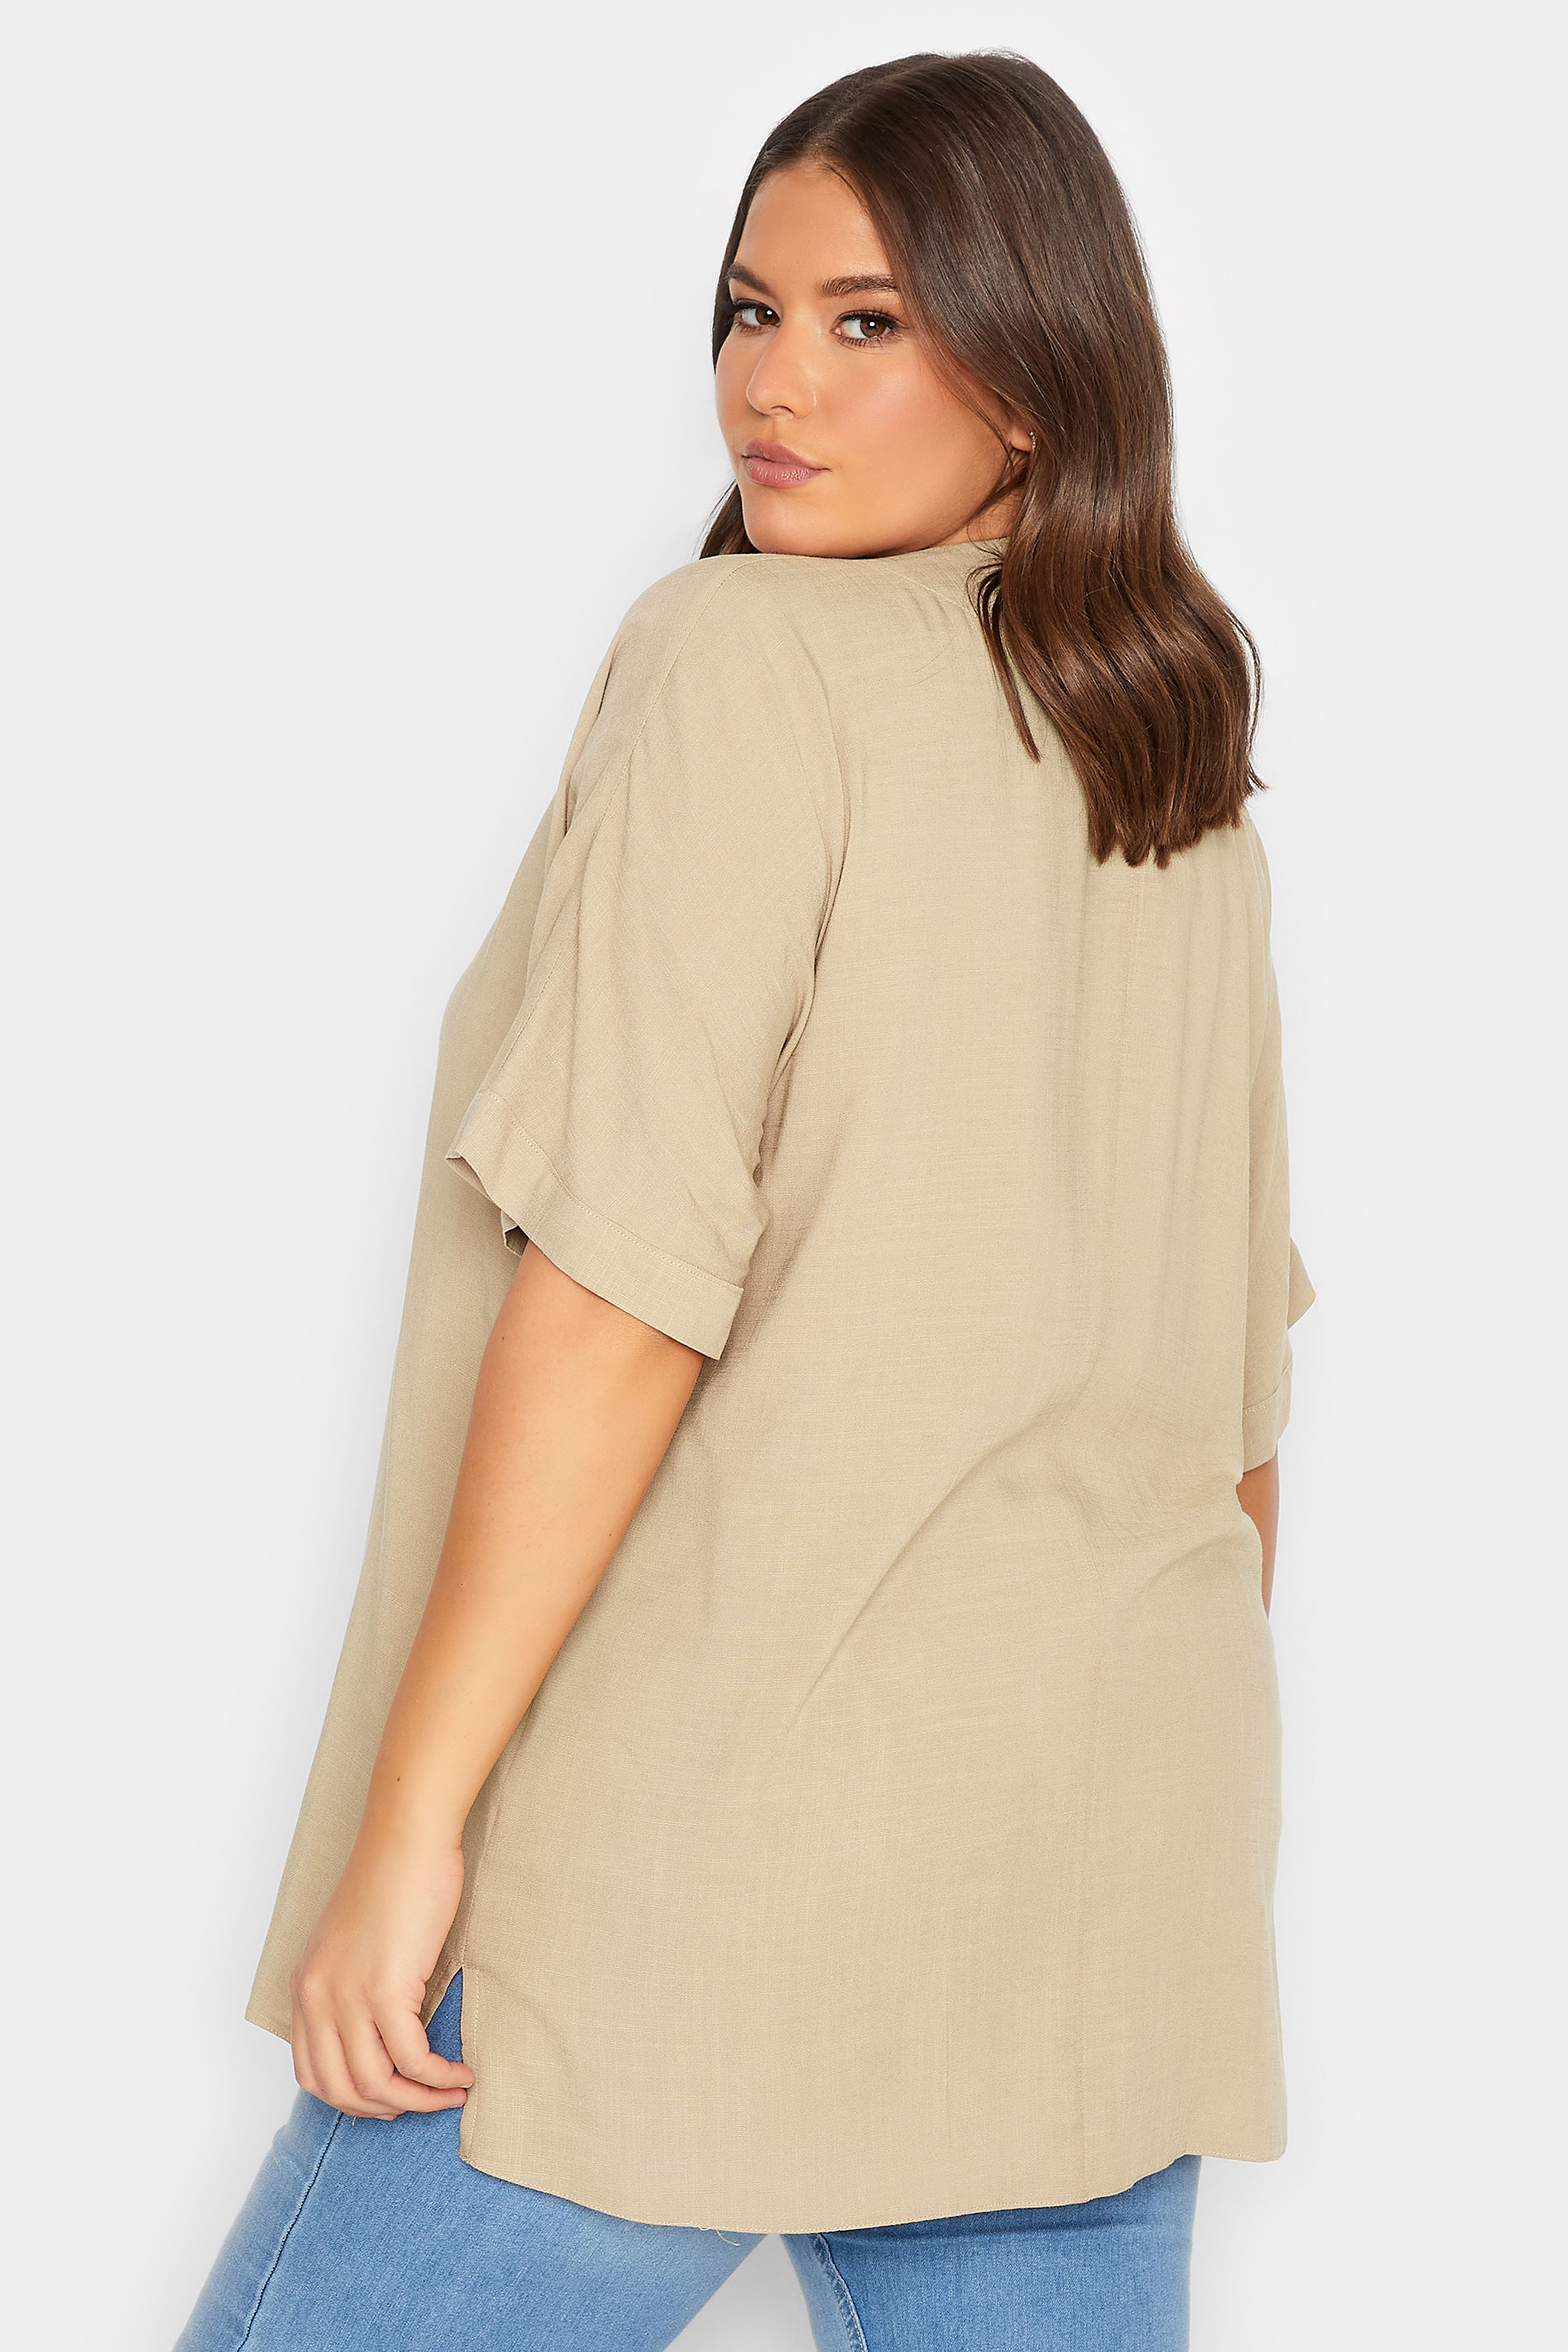 YOURS Curve Plus Size Beige Brown V-Neck Top | Yours Clothing  3